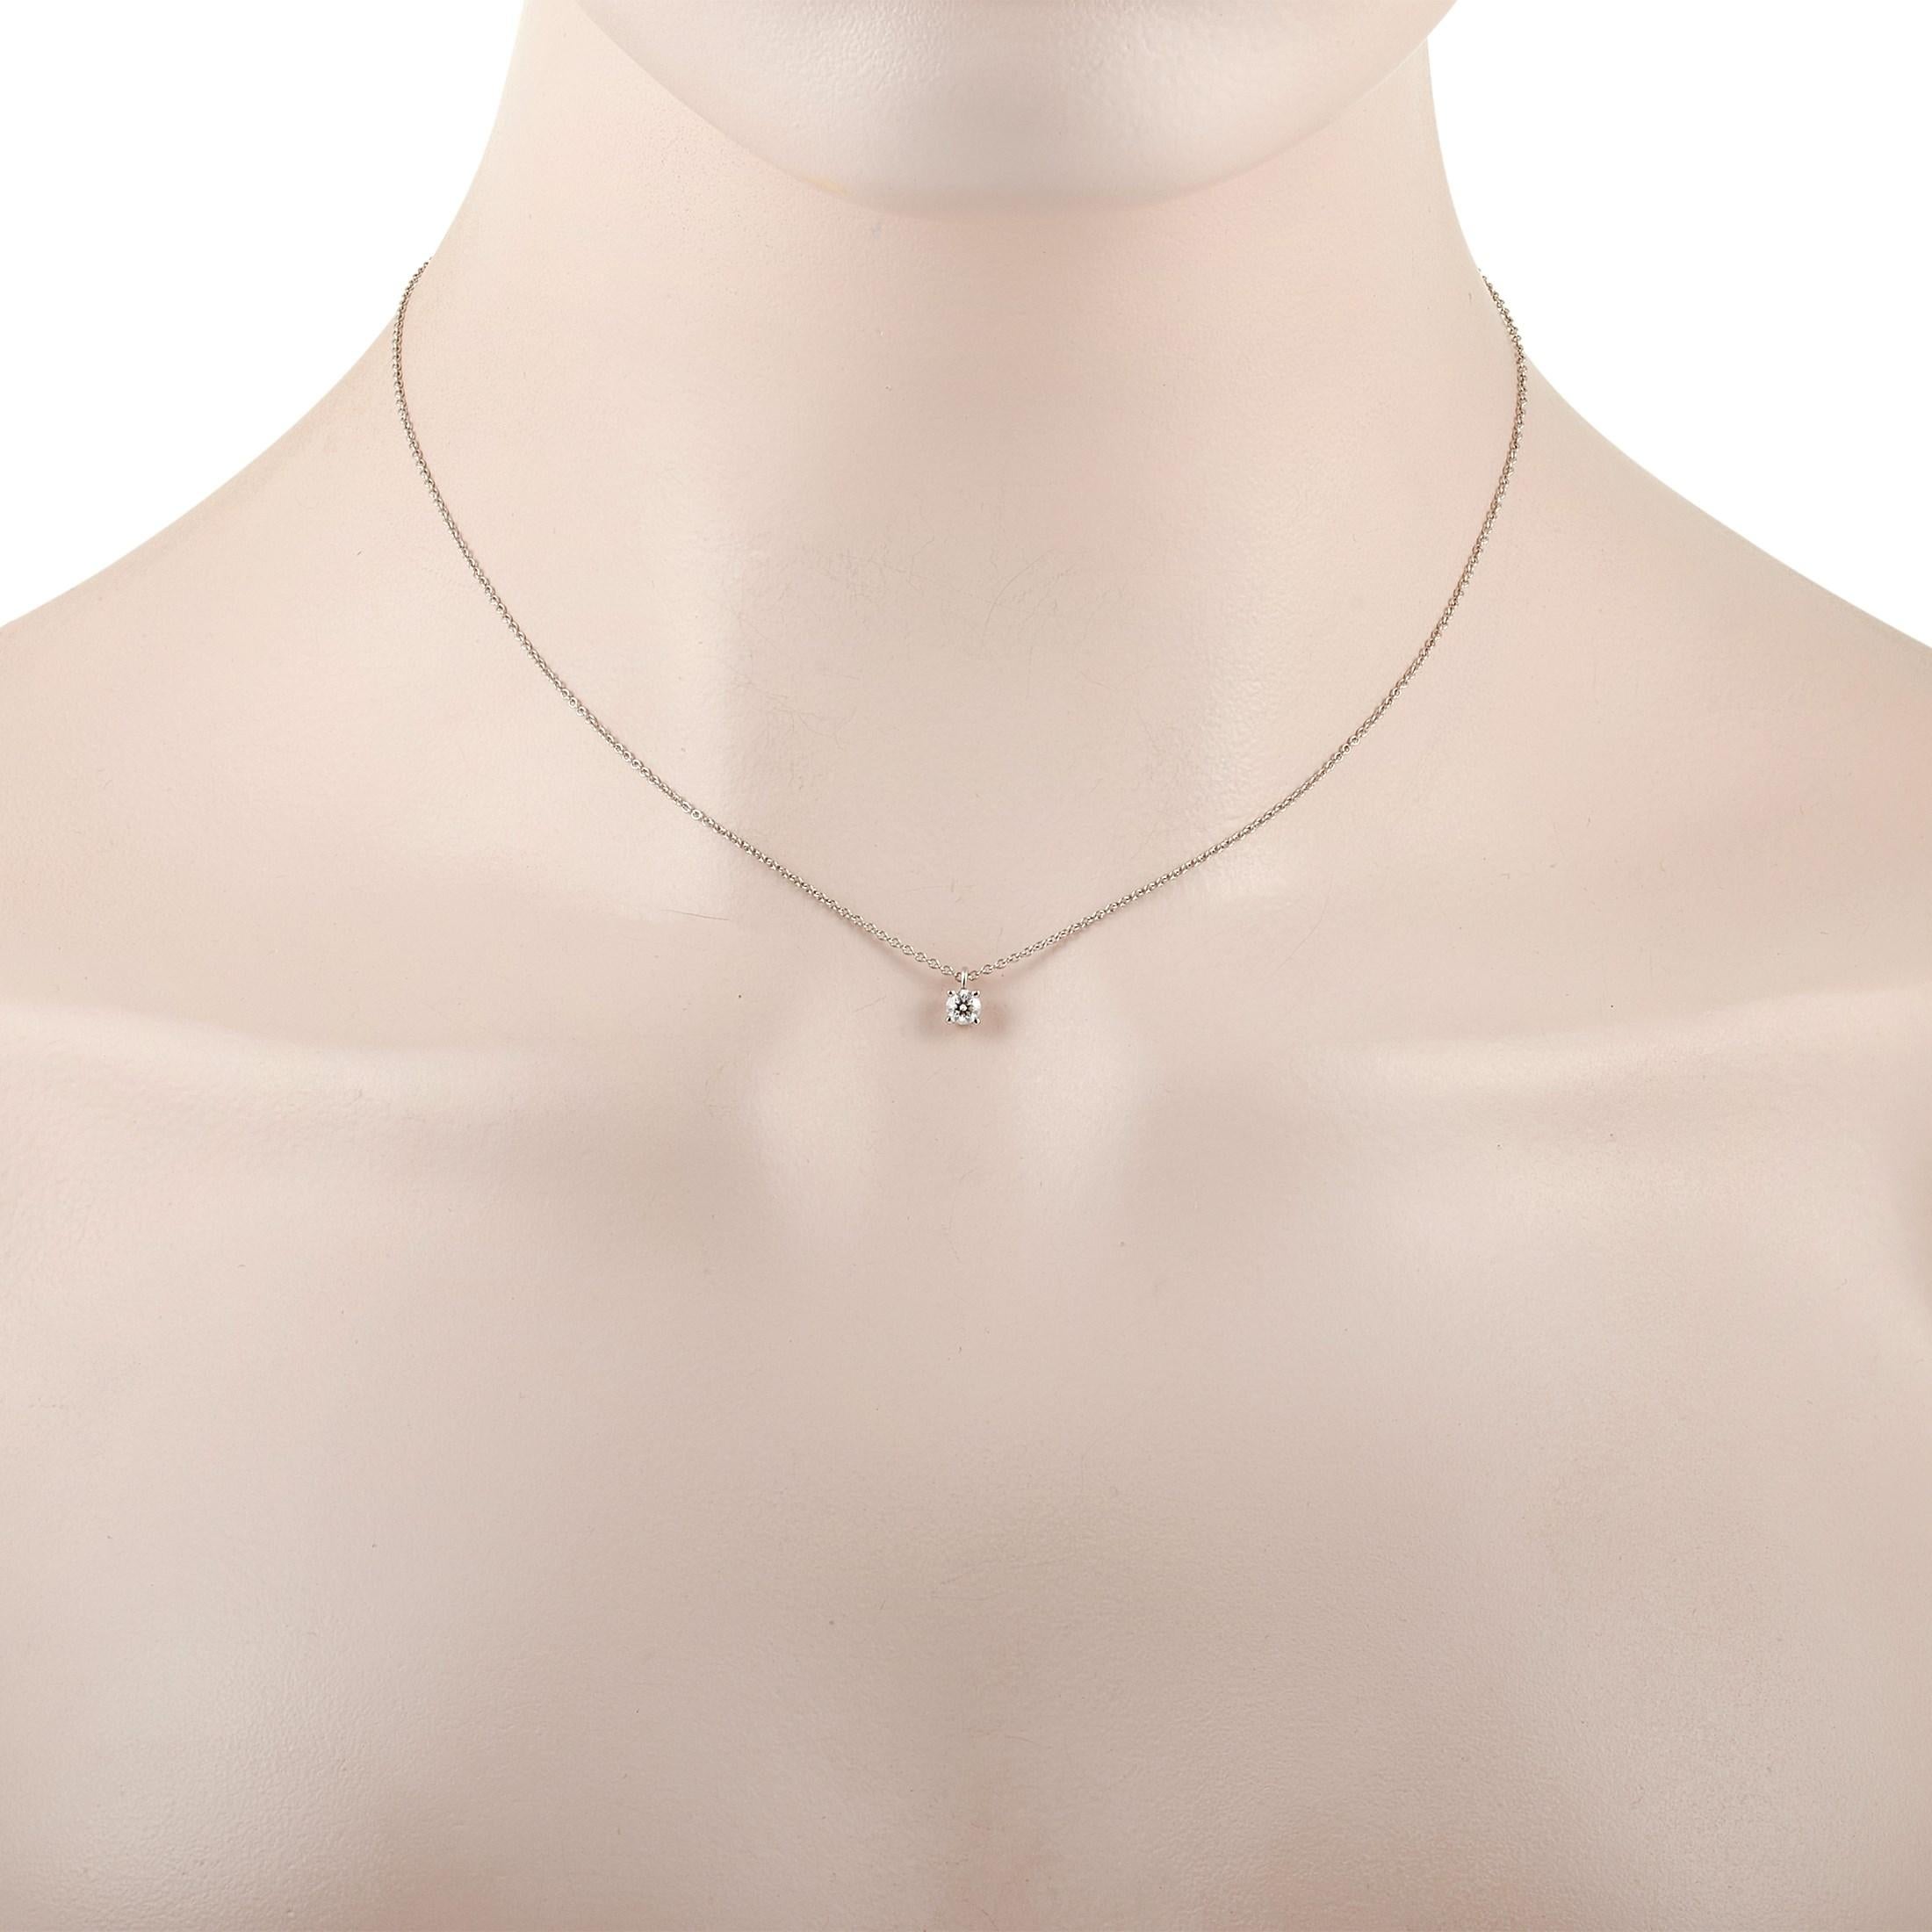 This classic Tiffany & Co. Platinum 0.15 ct Diamond necklace is made with Platinum and features a solitary 0.15 carat diamond pendant held in place by four prongs. The fine platinum chain measures 15 inches in length and features a spring-ring